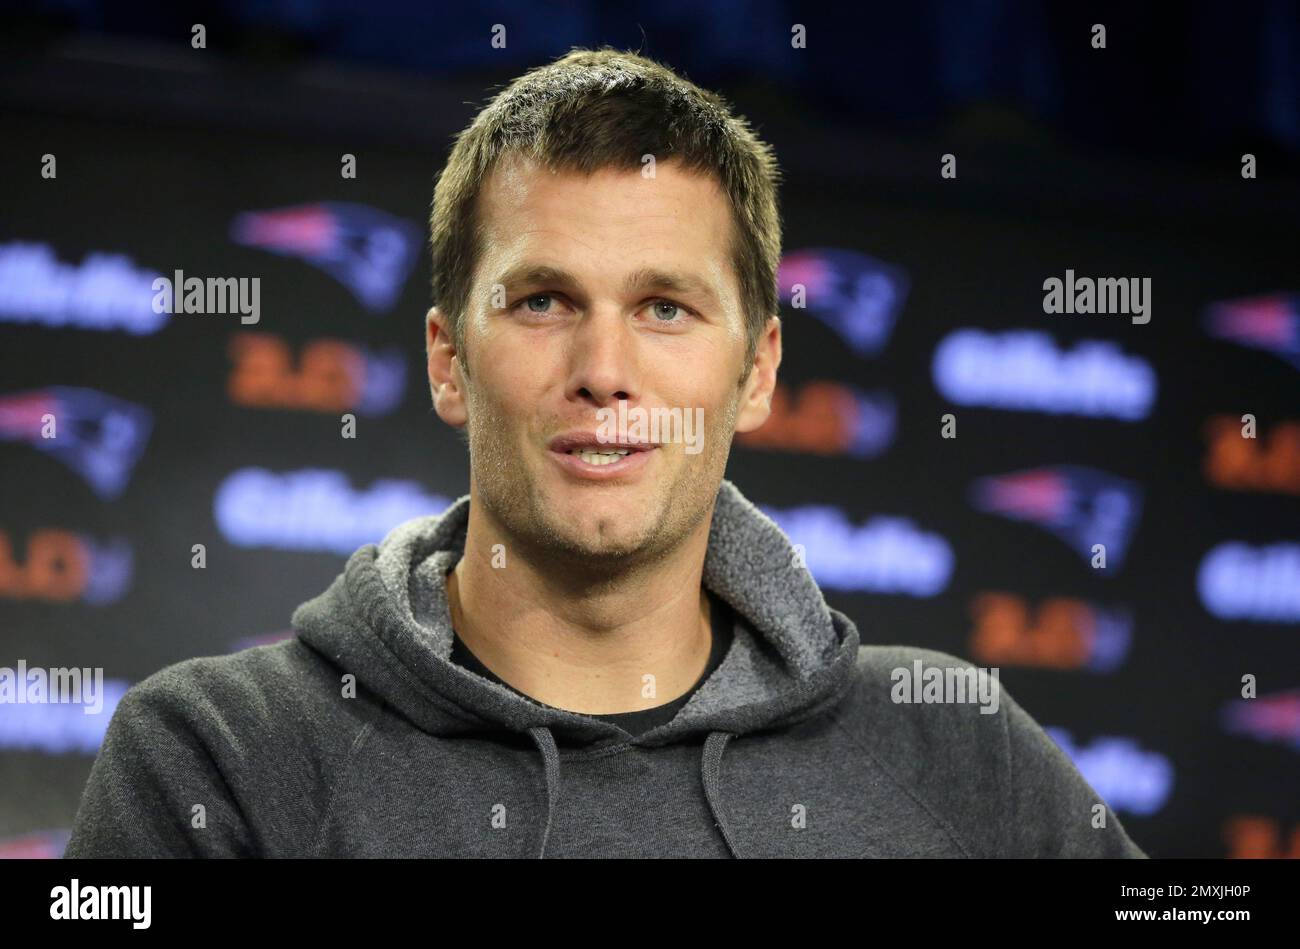 New England Patriots Quarterback Tom Brady Takes Questions From Reporters During A News